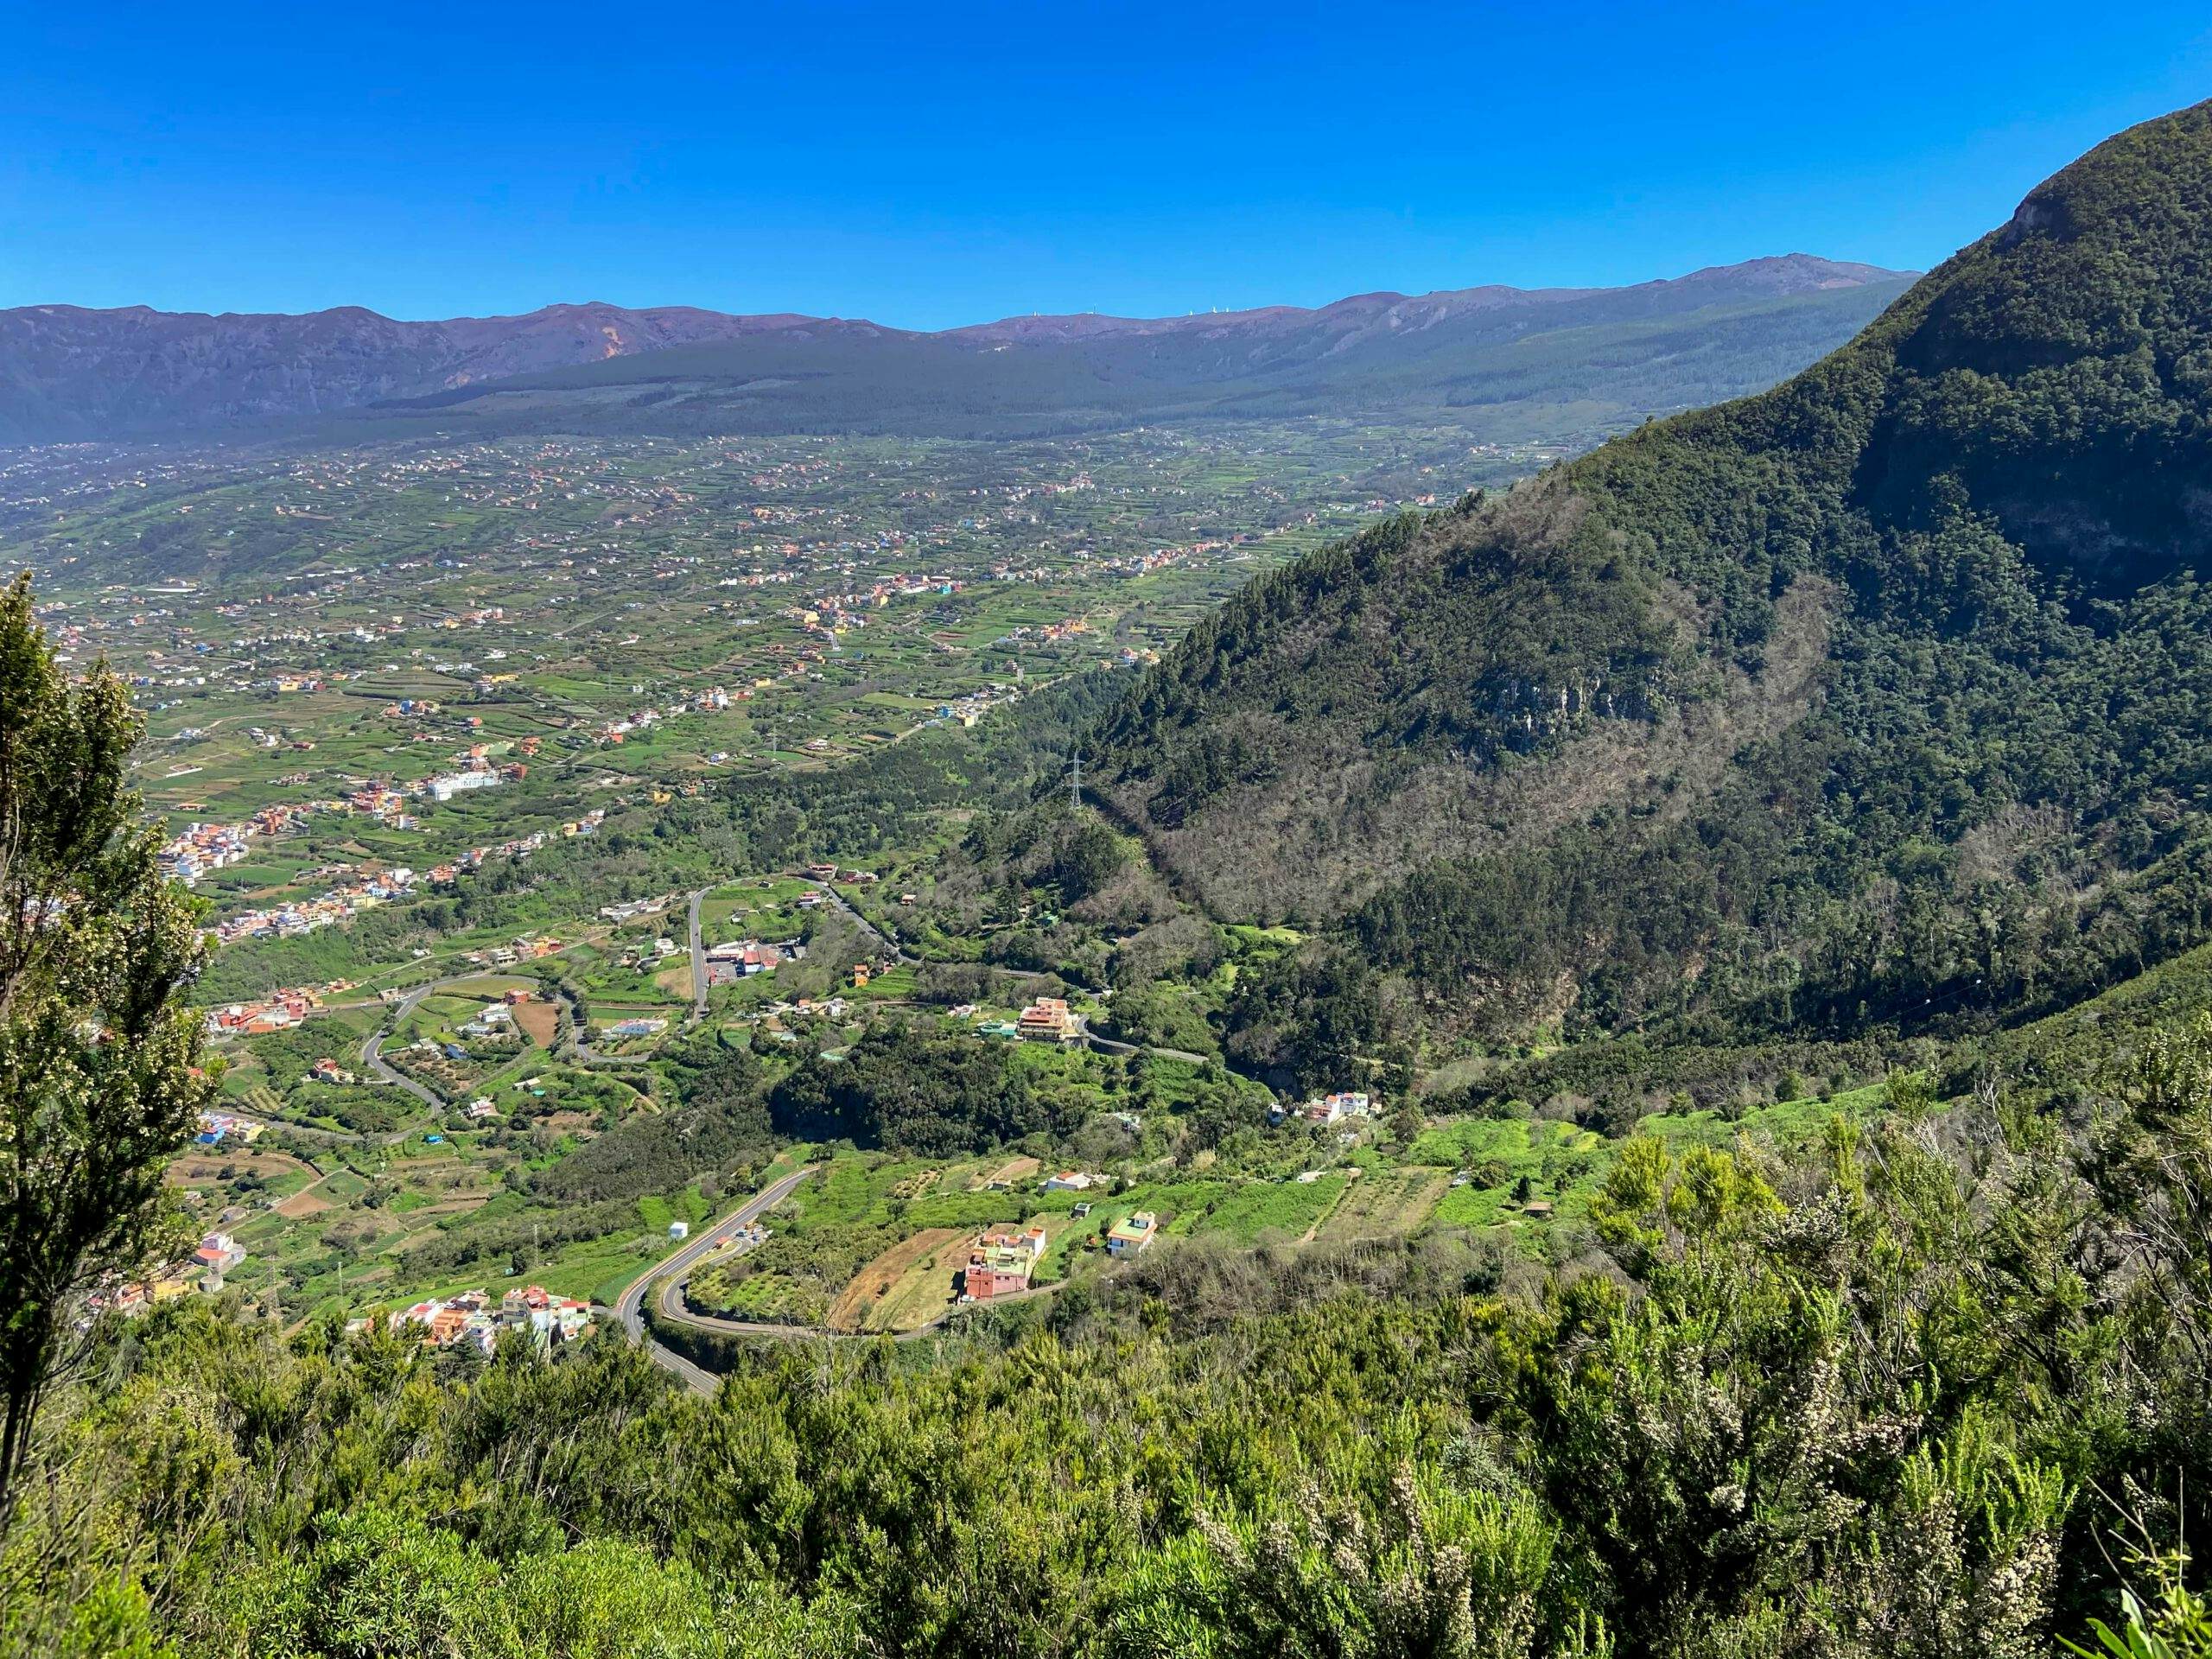 Hiking in Tenerife - Orotava Valley - View back from the ascent path to Mirador Corona